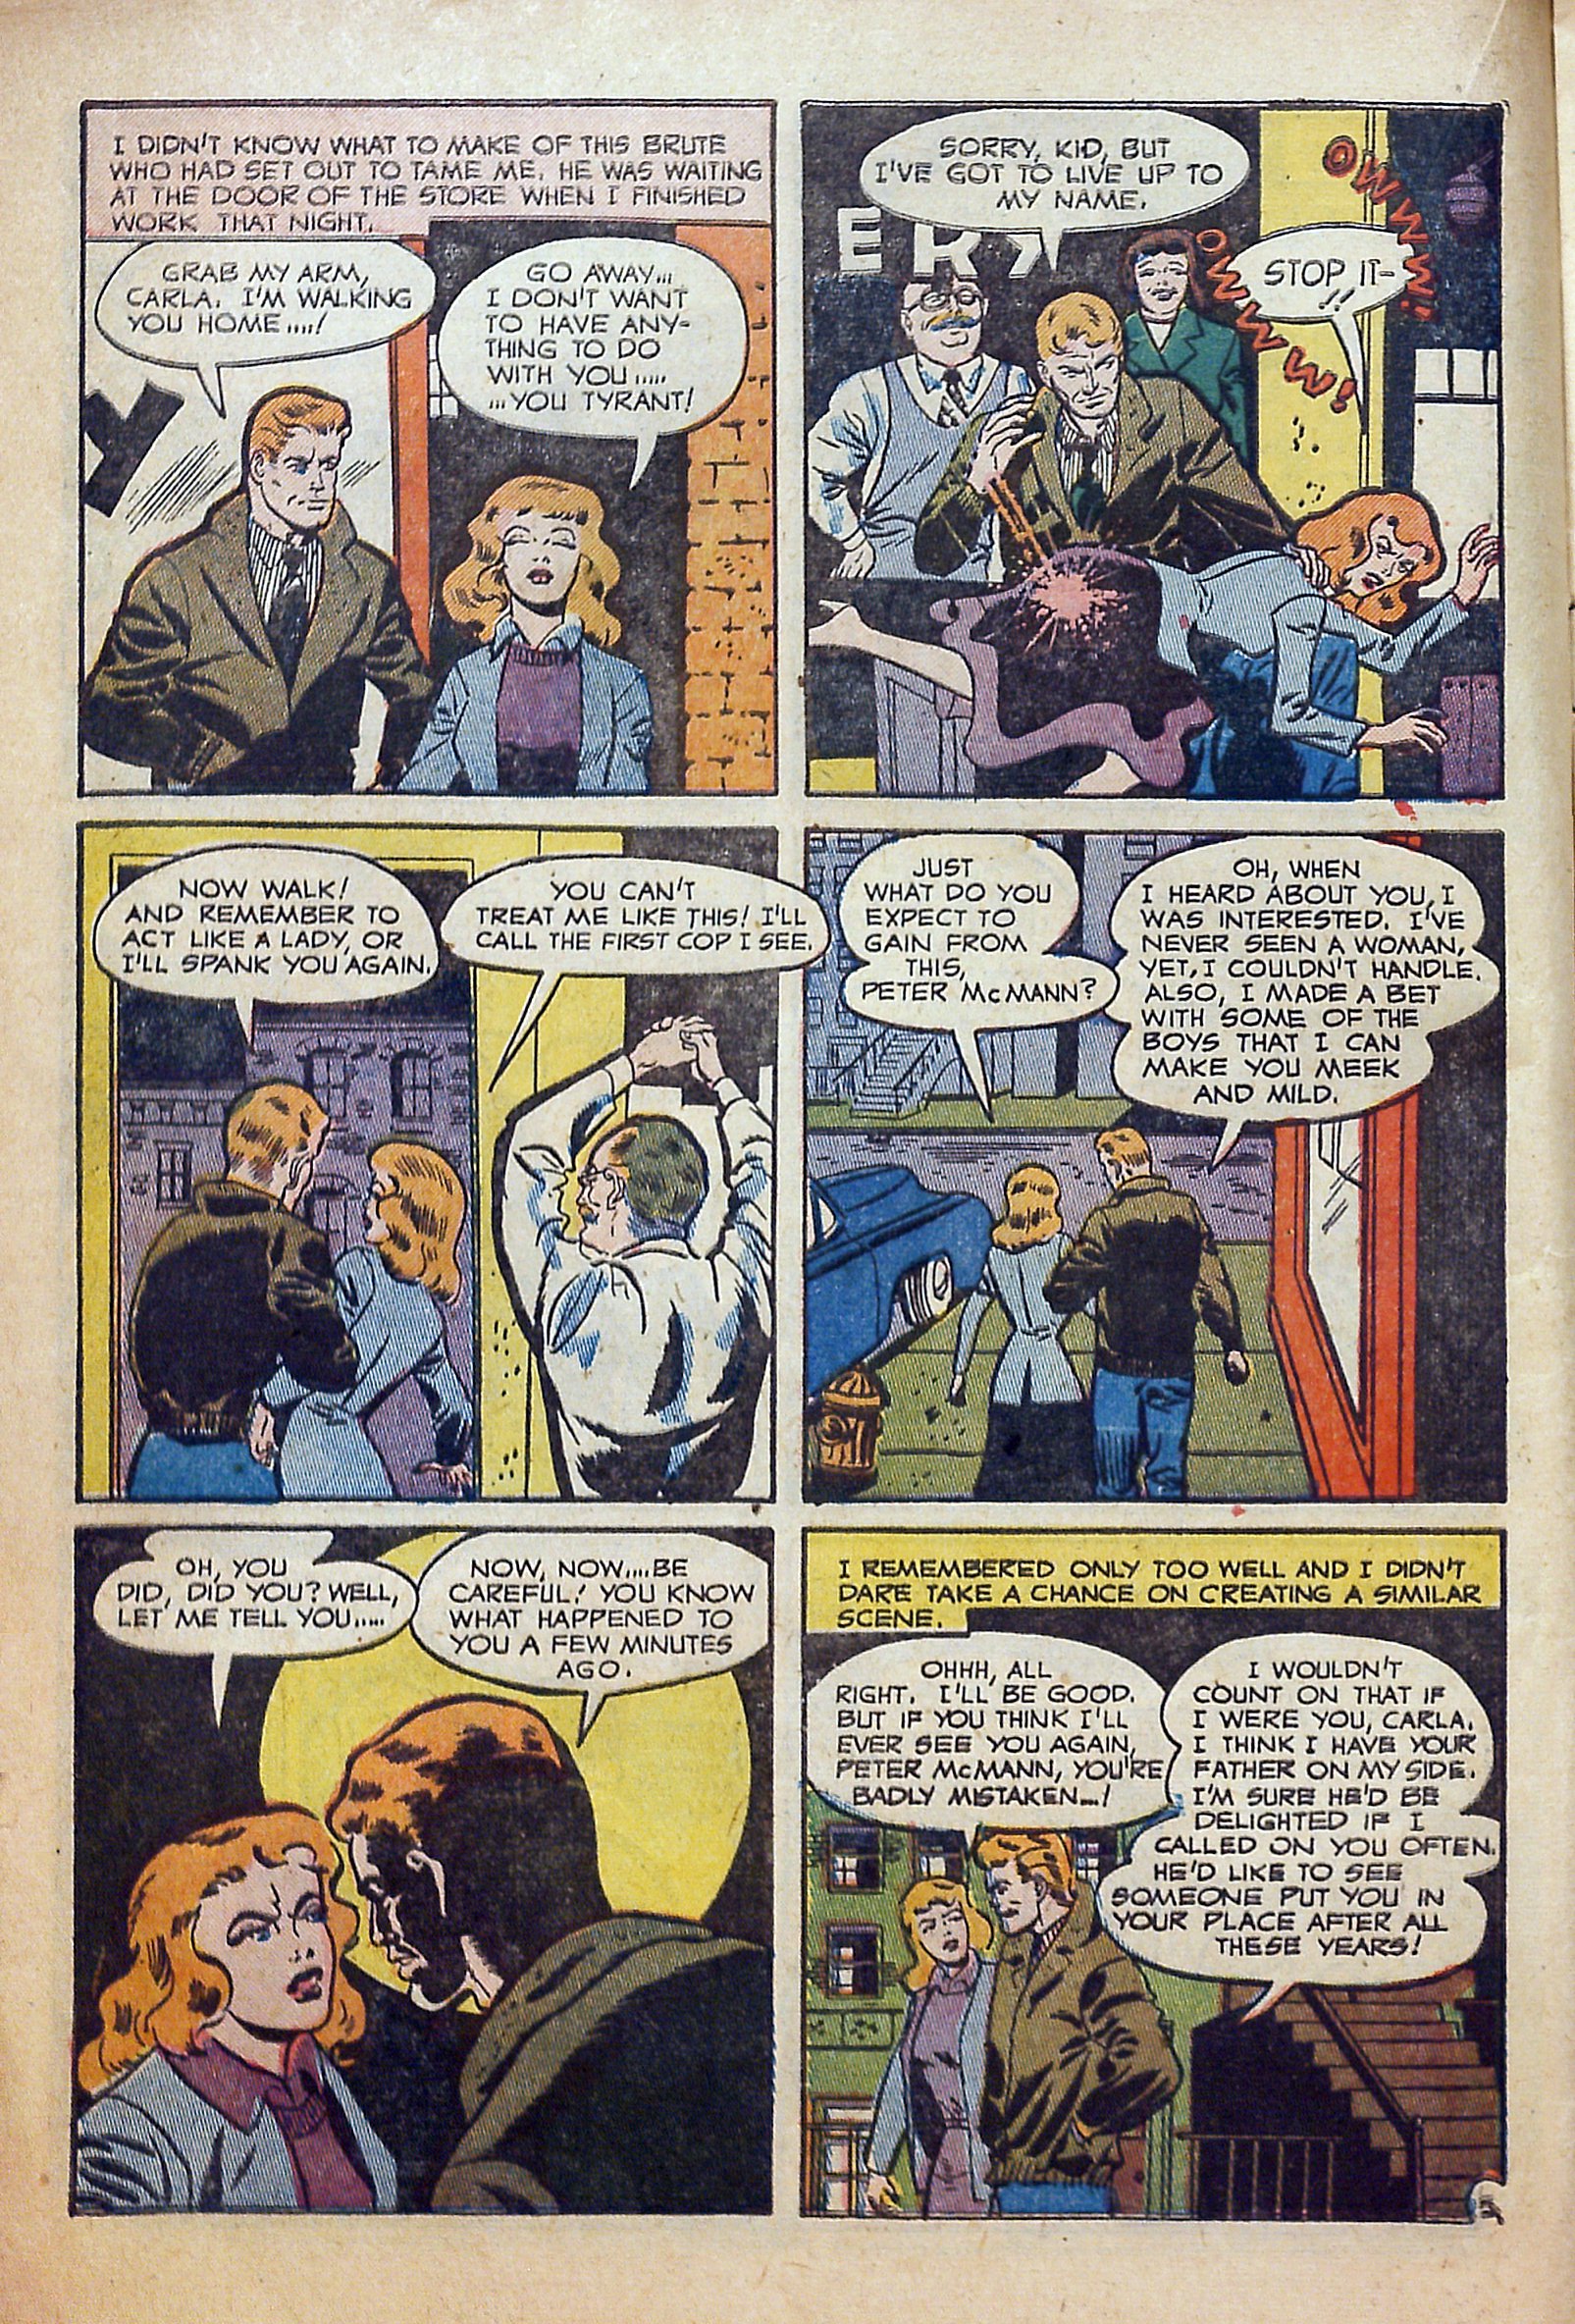 Popular Teen-Agers #14 I was a Shrew page5